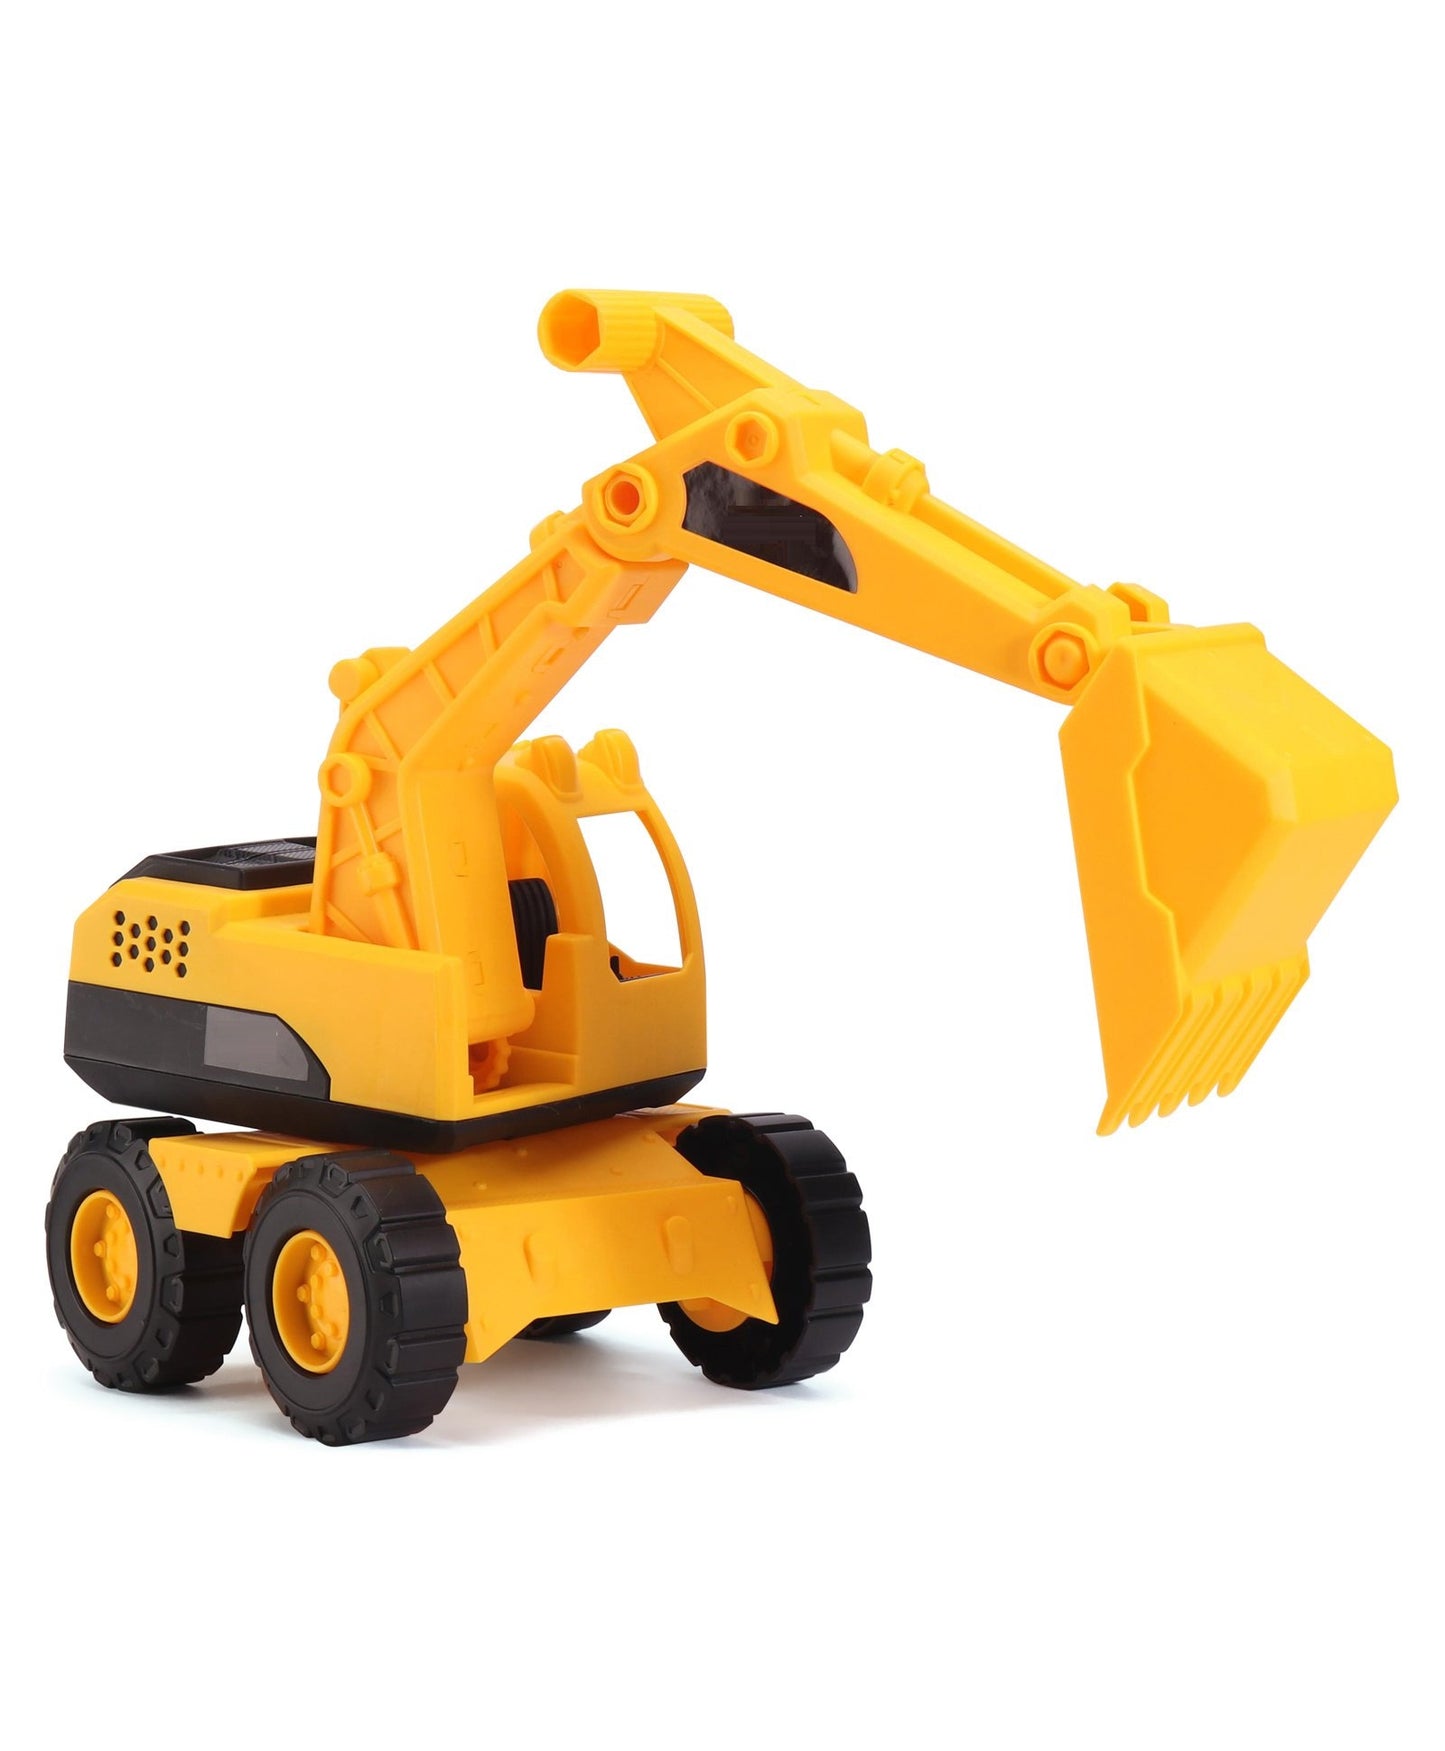 High Quality Friction Powered Big Bulldozer and Excavator Toy for Kids (Yellow, Large) (First Edition)